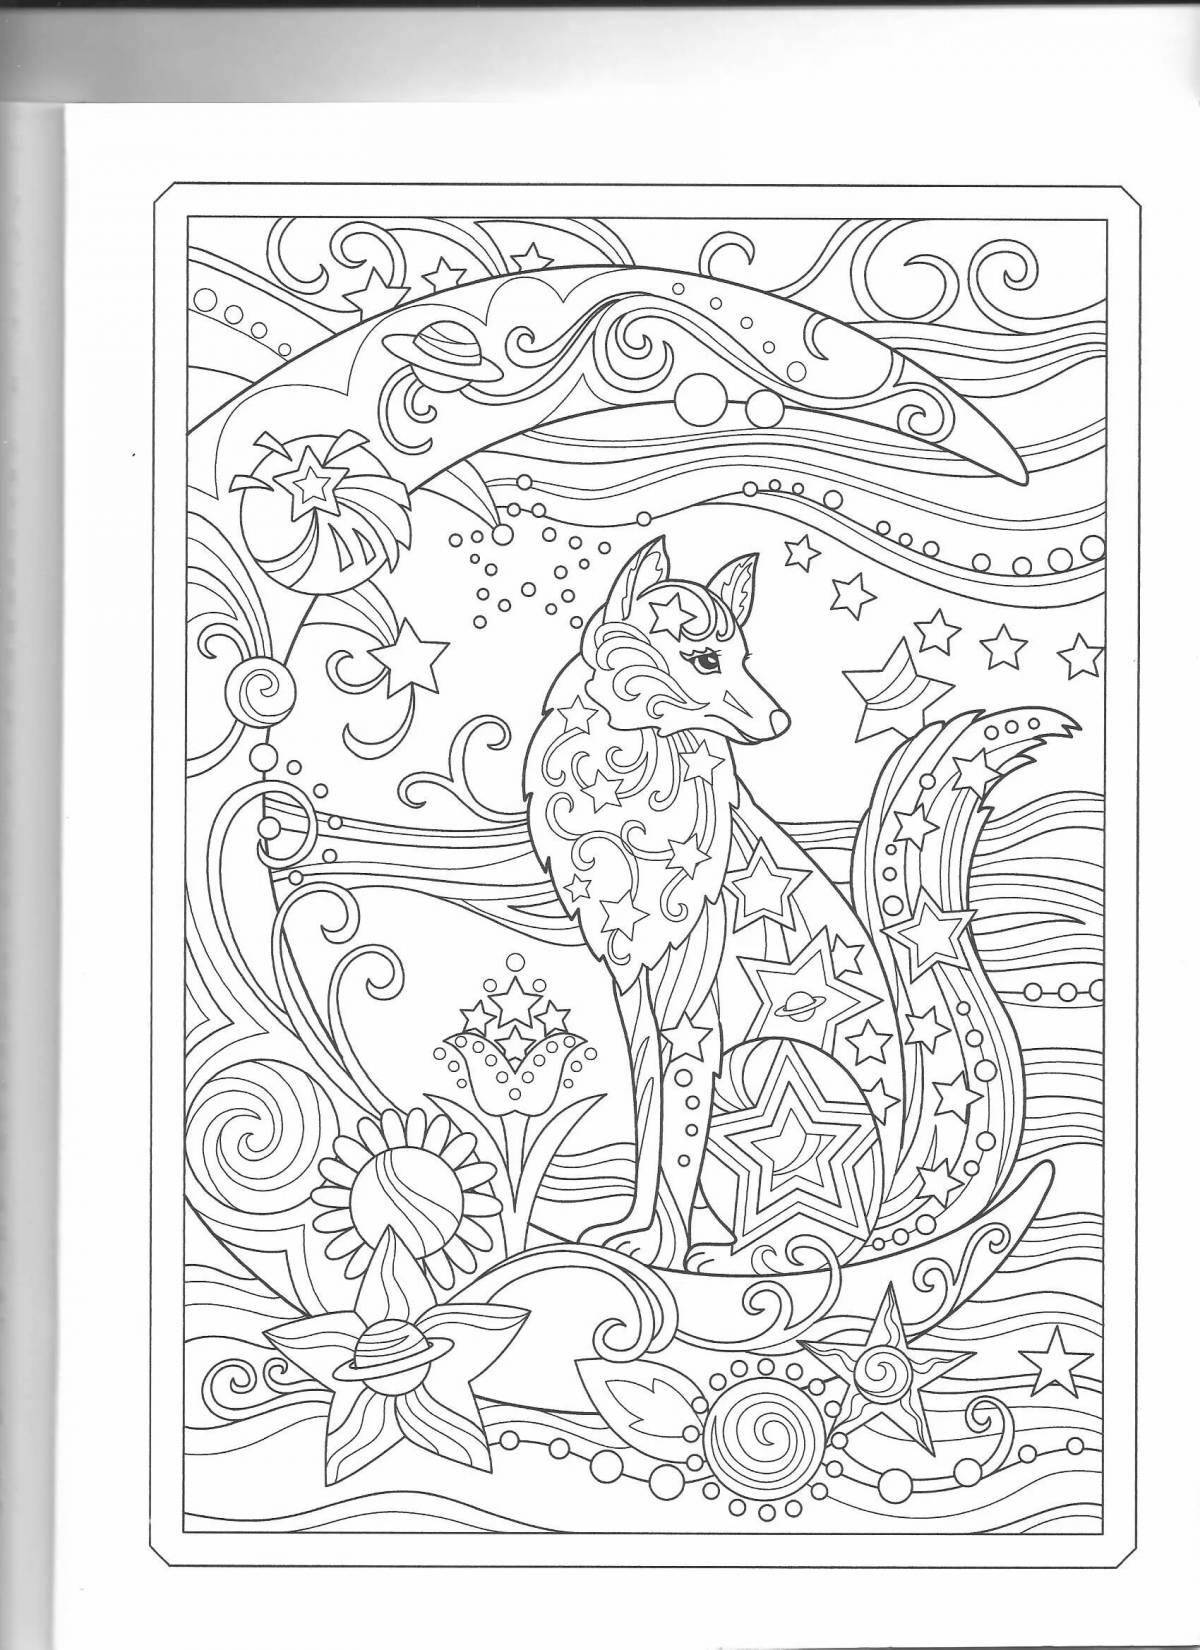 Great adult fox coloring book